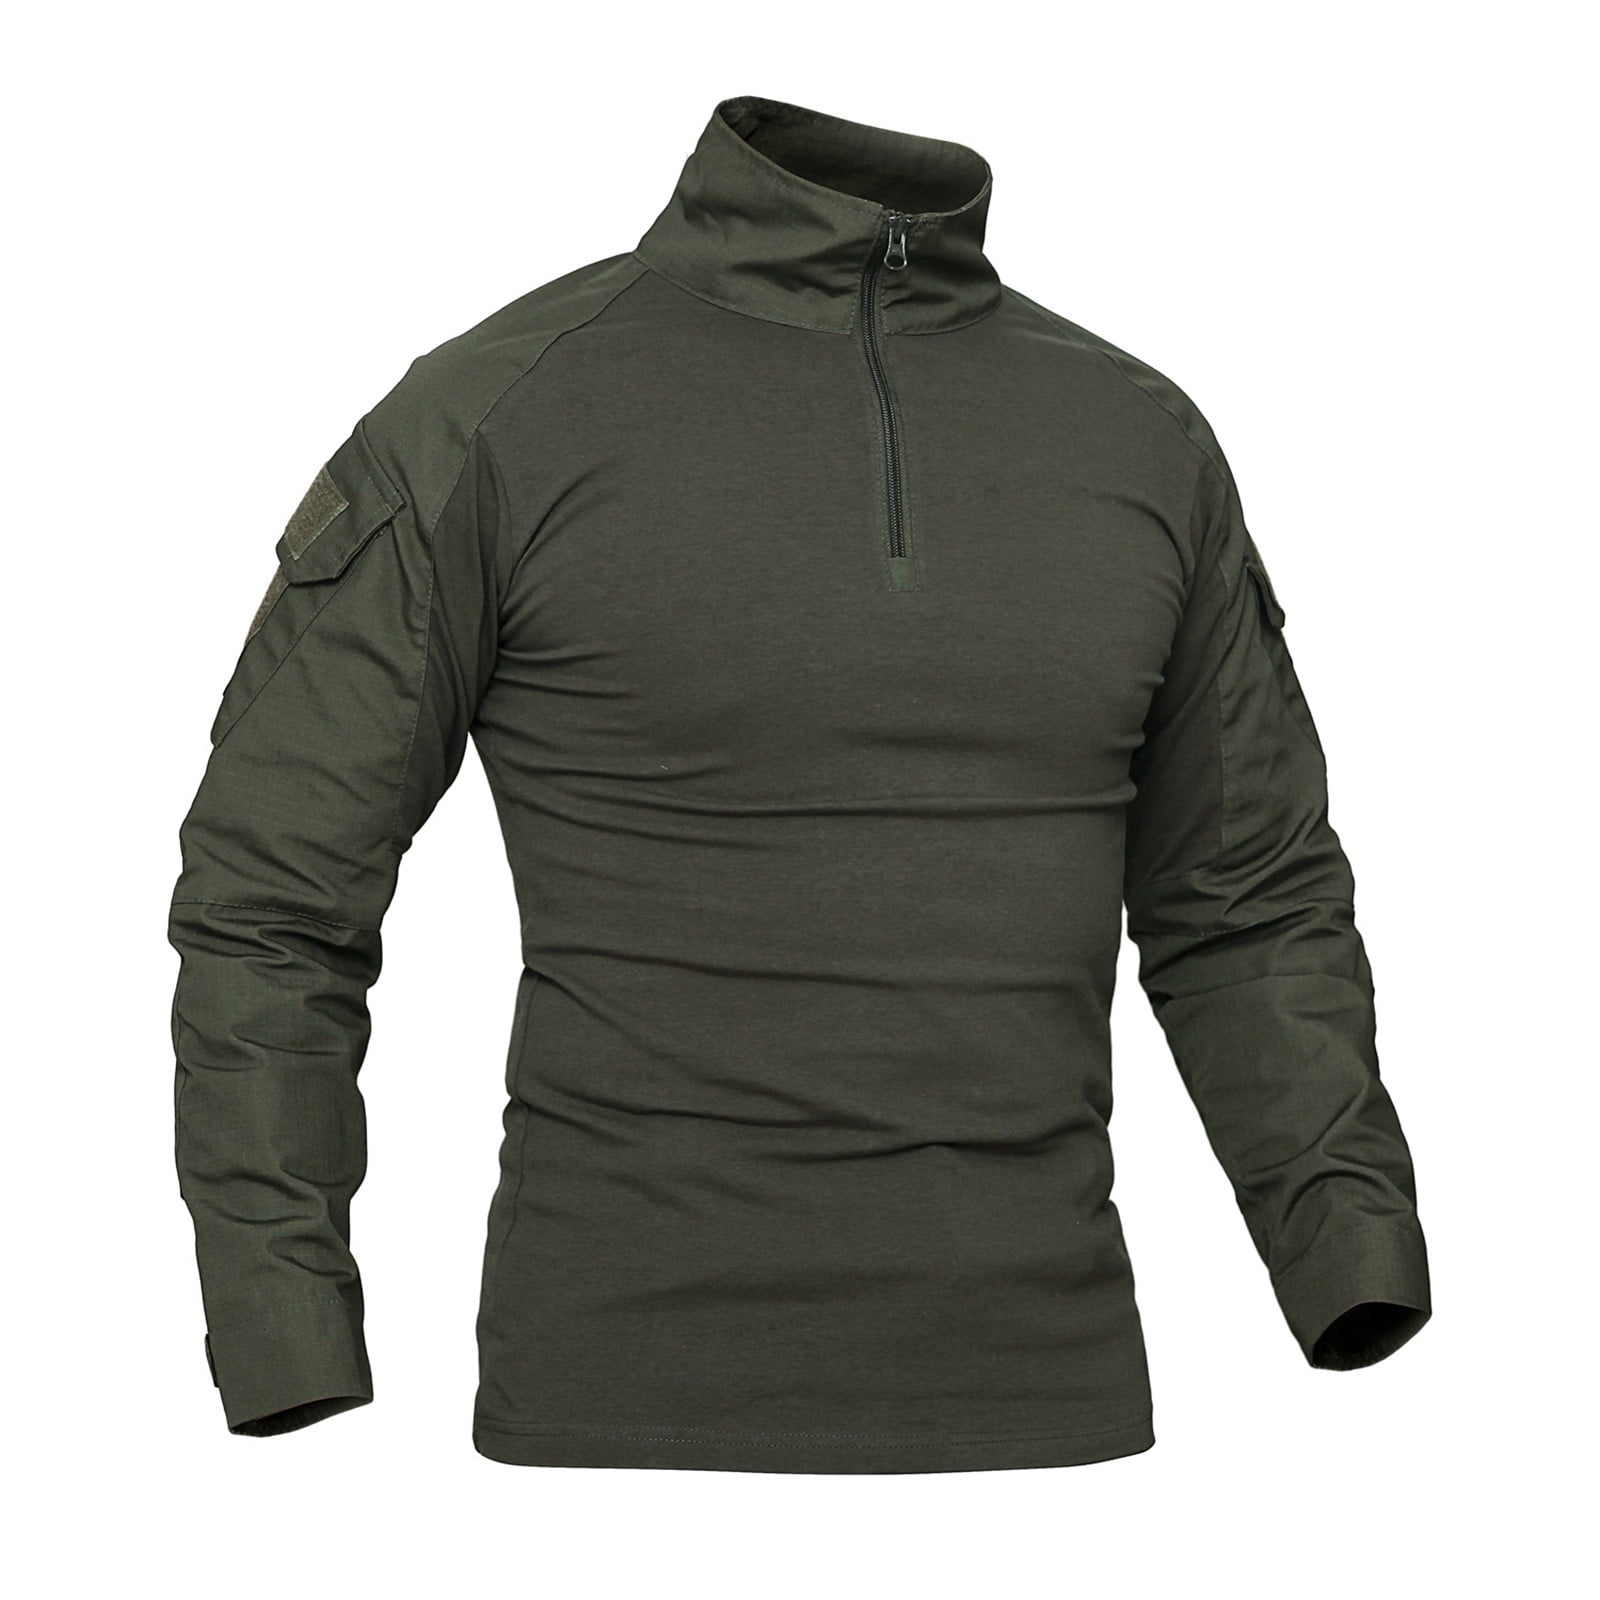 Sweatshirts for Men Camouflage Long Sleeve Training Suit Casual Fitness  Stretch Lightweight 1/4 Zip Pullover Tops 